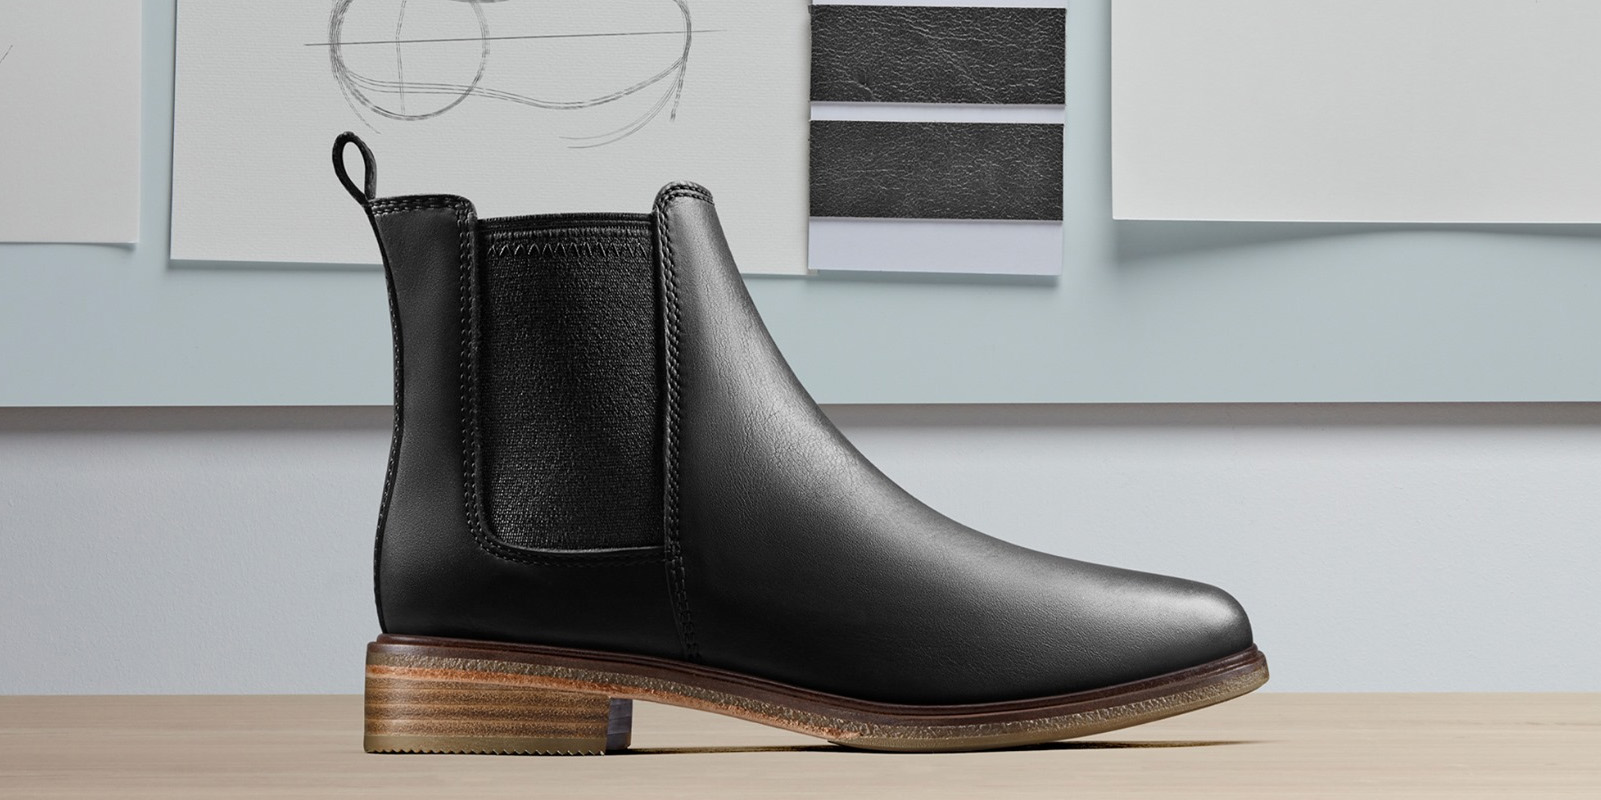 Clarks Final Clearance Event takes up to 50 off sale styles from 15